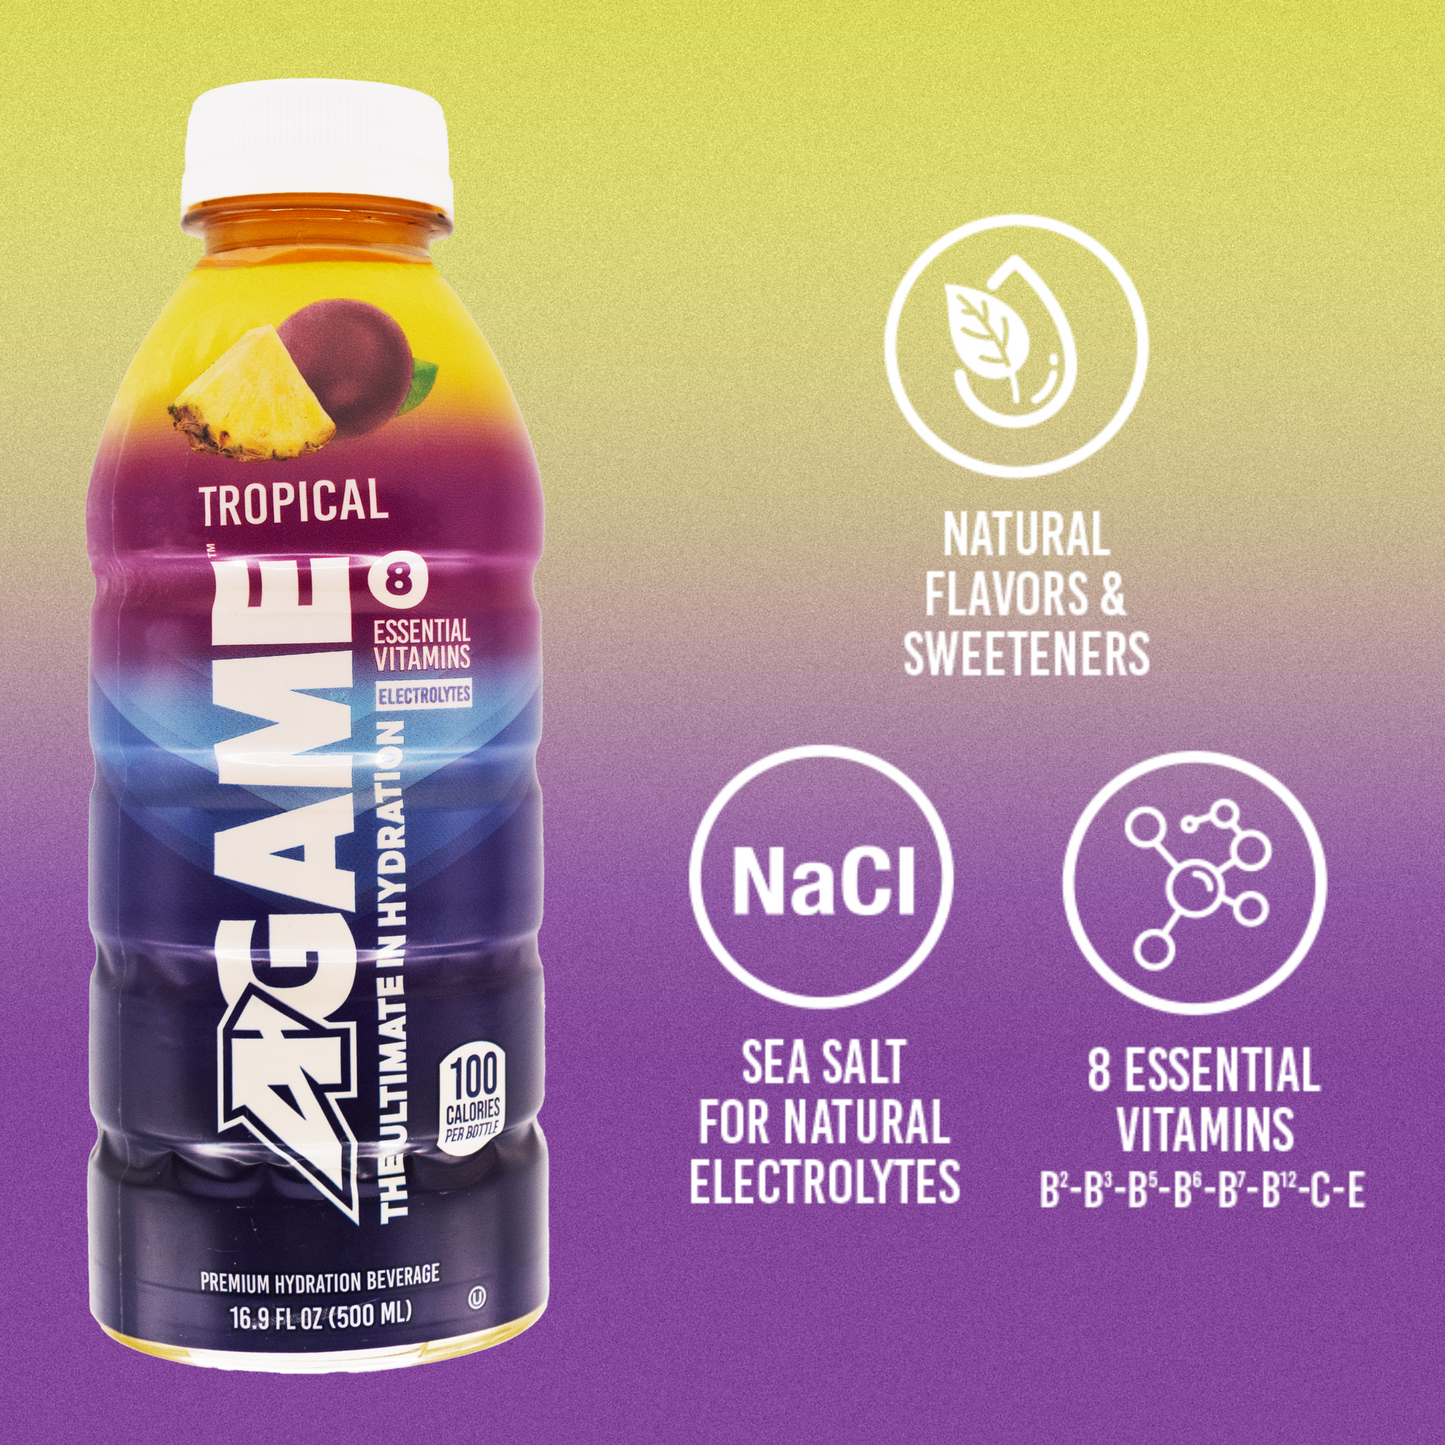 A-GAME Sports Drink